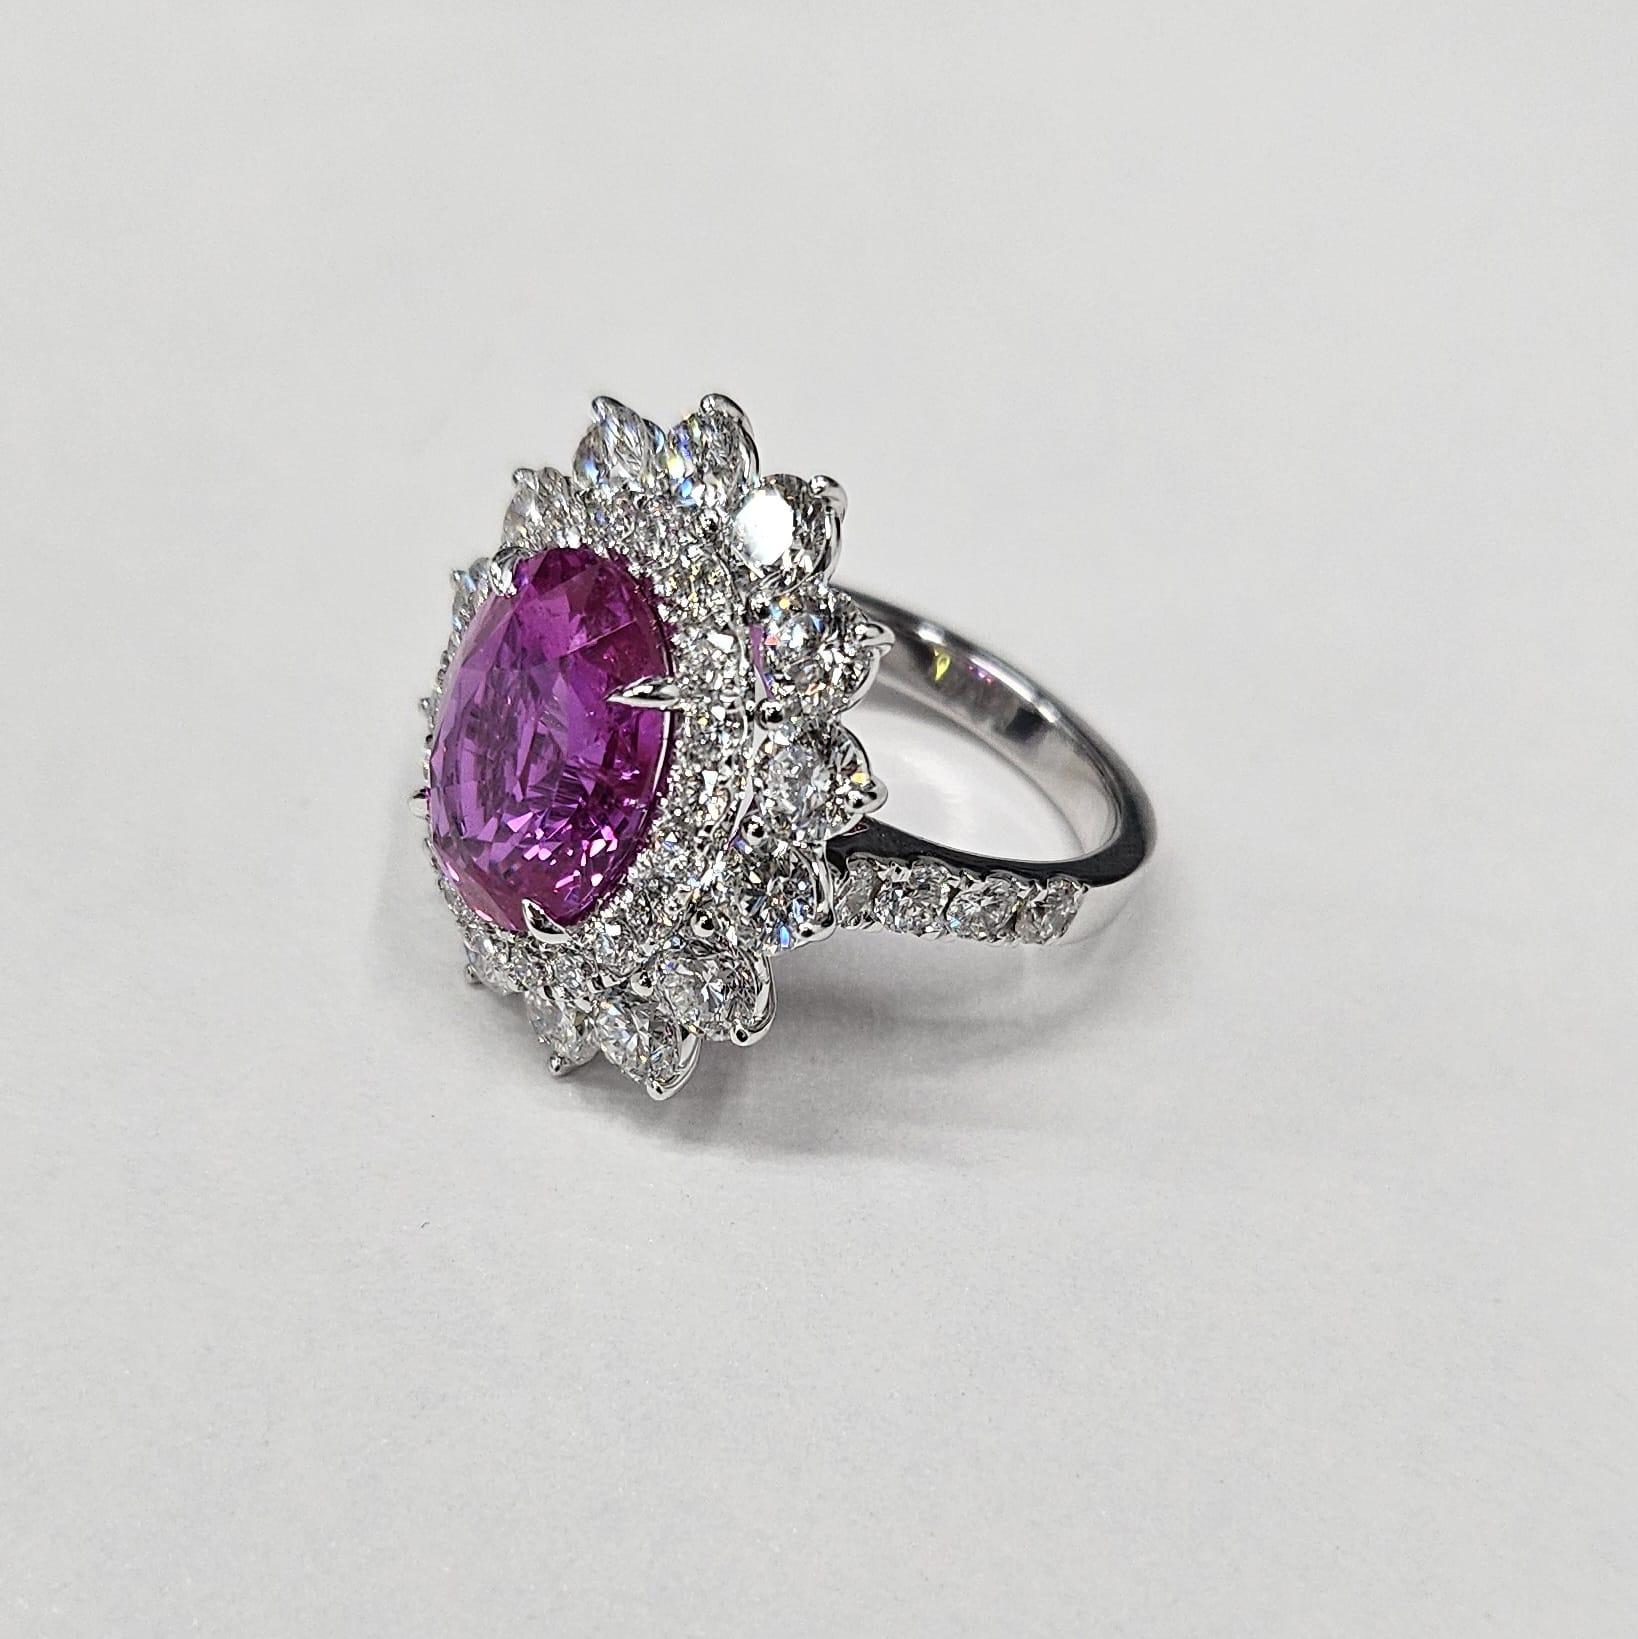 GRS Certified 5.81 Ct Pink Sapphire & 3.59 Ct Diamond Ring in 18K White Gold For Sale 1